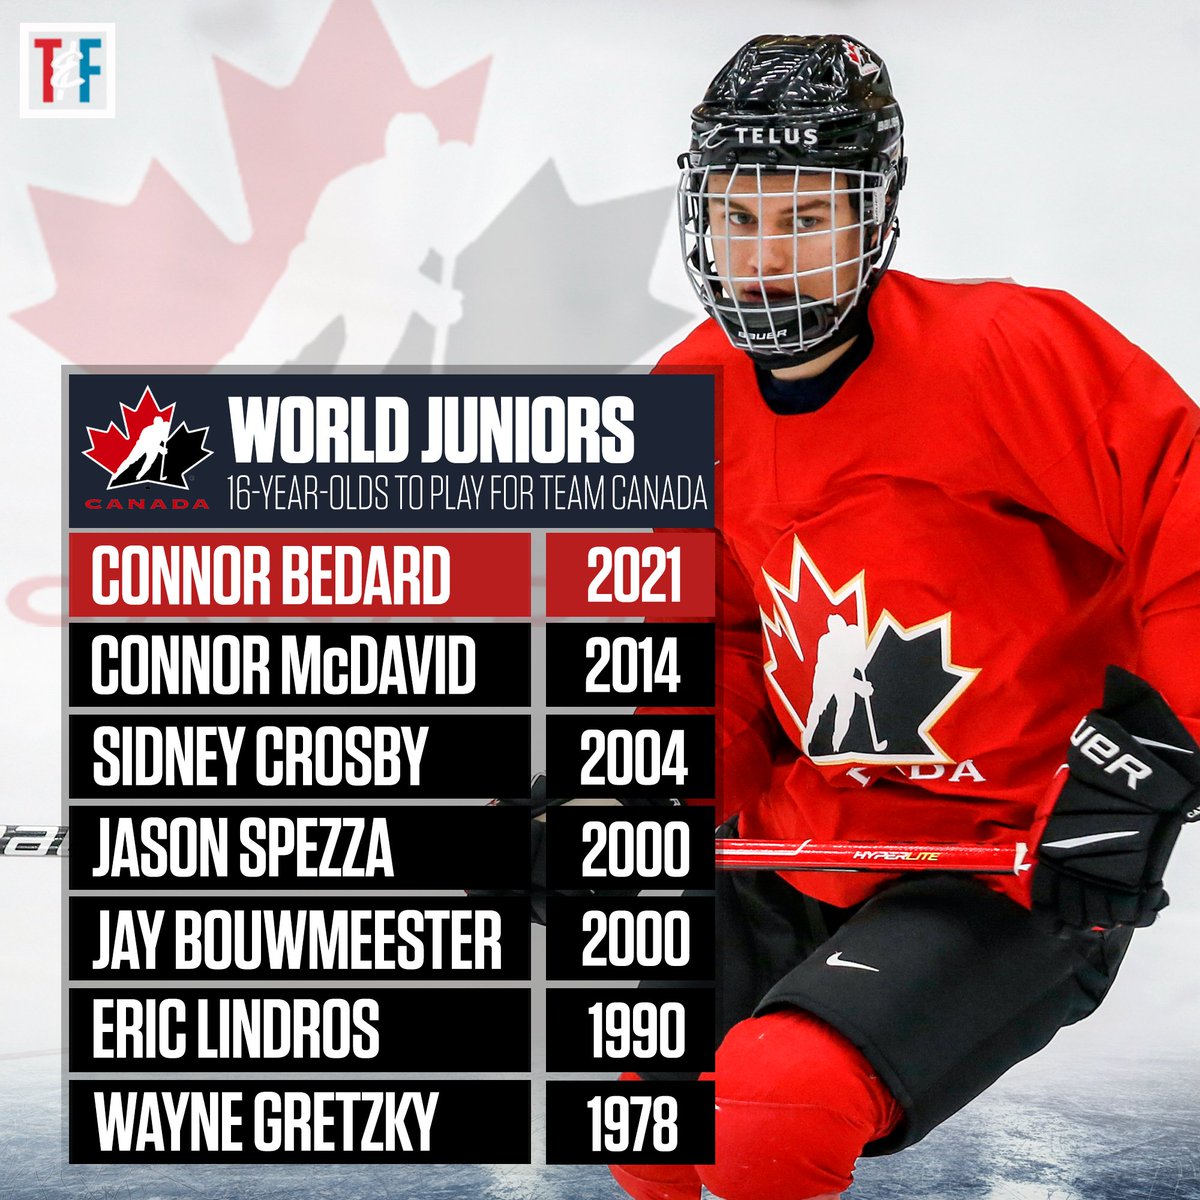 Connor-Bedard-recieved-the-most-goals-by-a-Canadian-at-the-World-Juniors--52-36.jpg